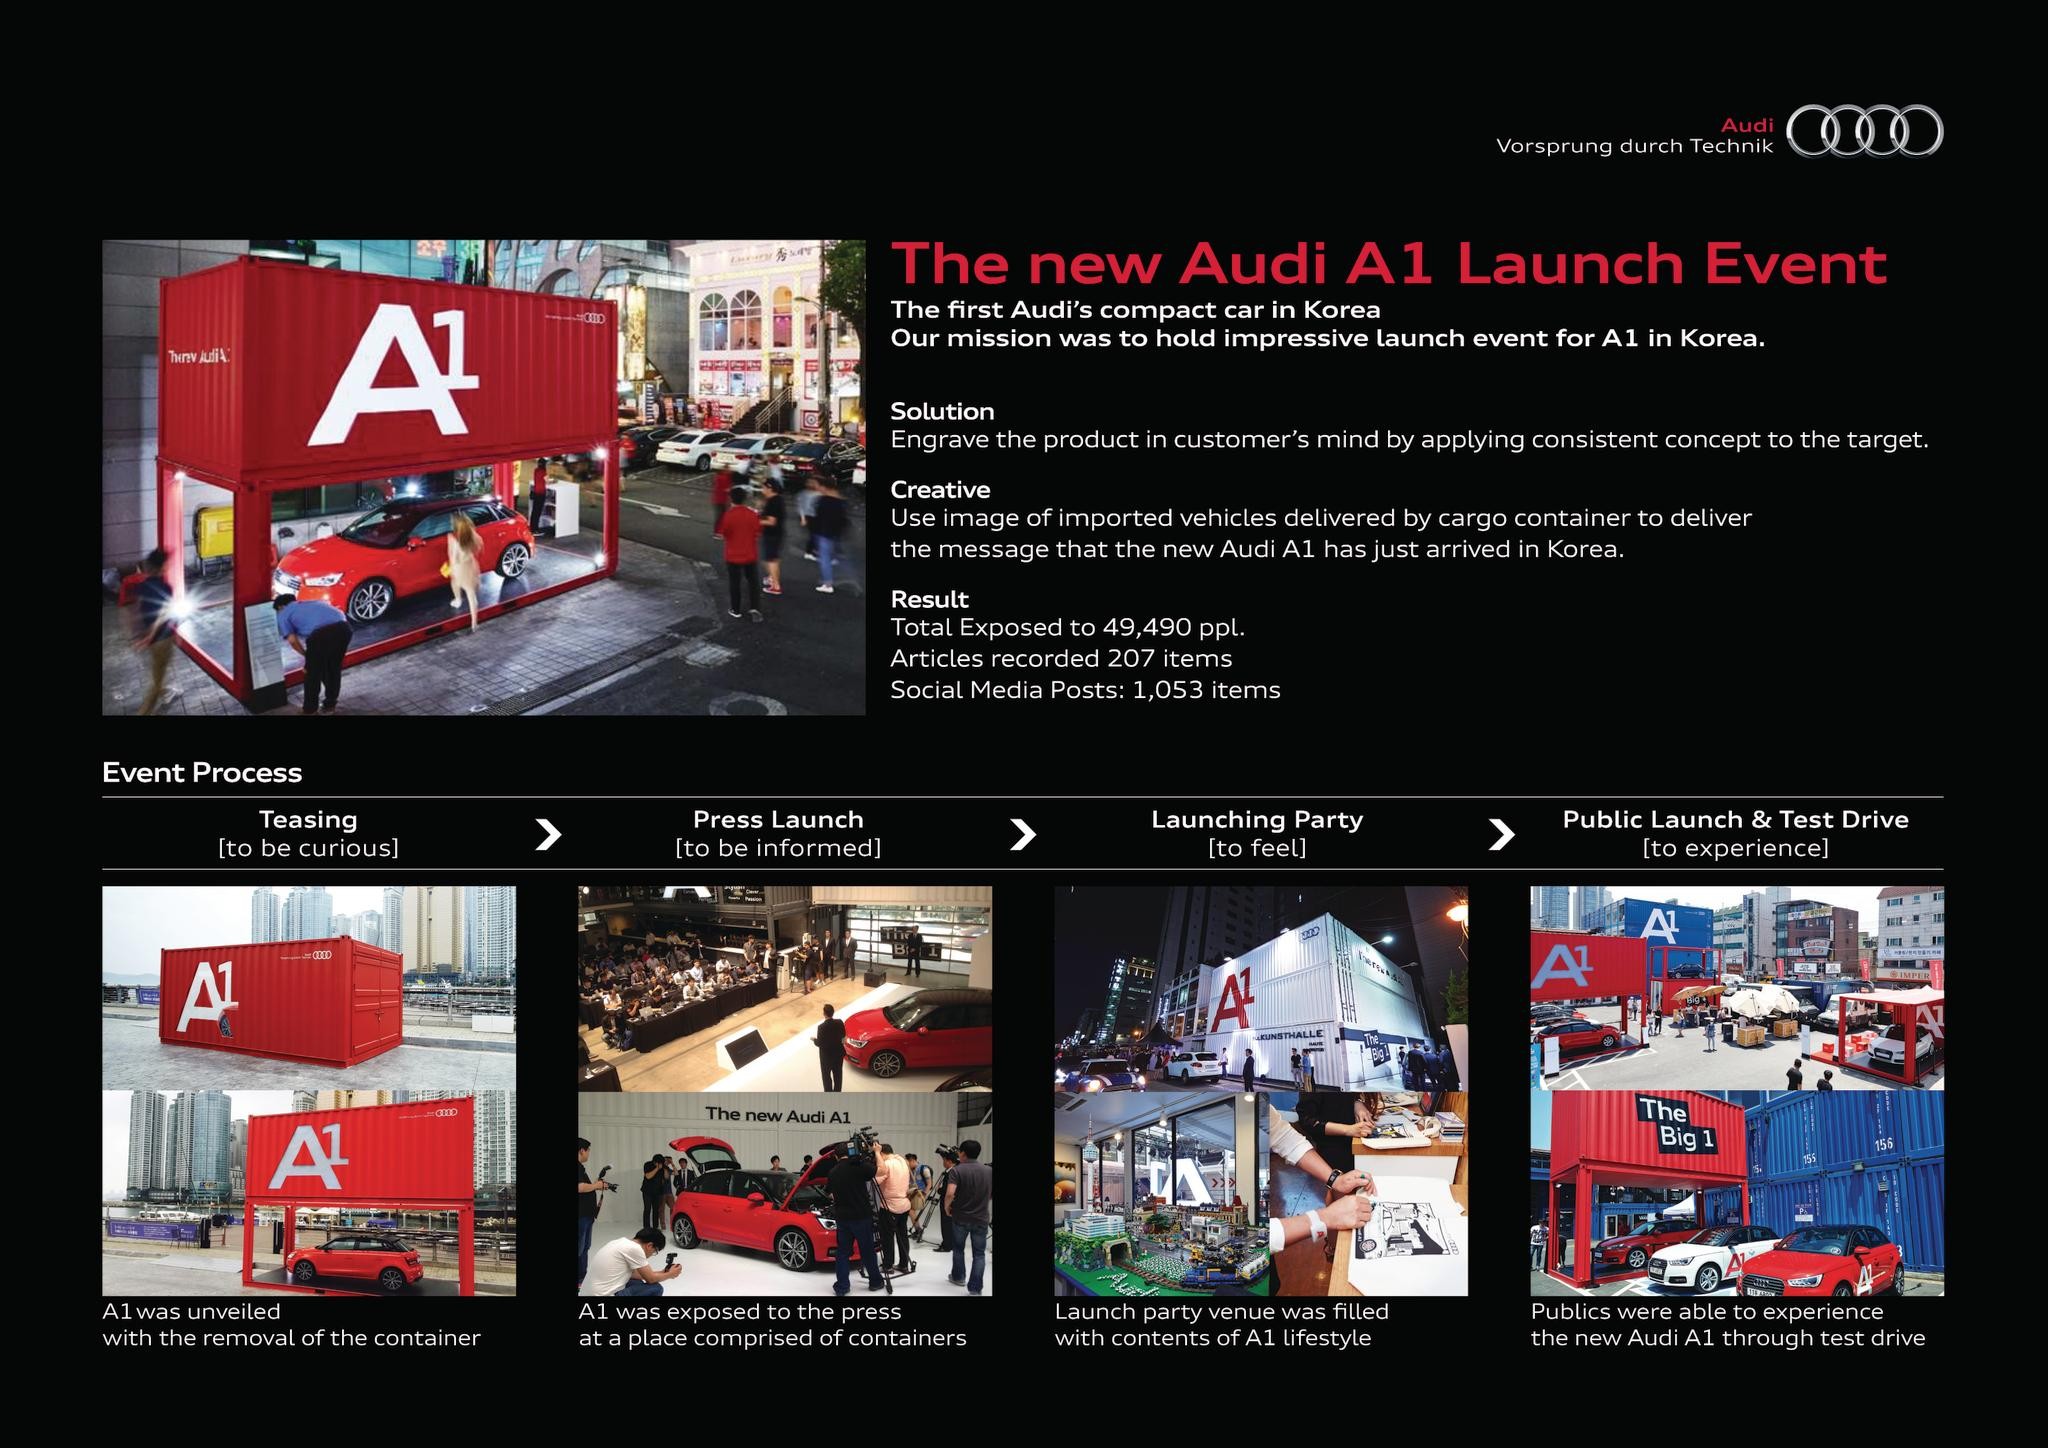 The new Audi A1 Launch